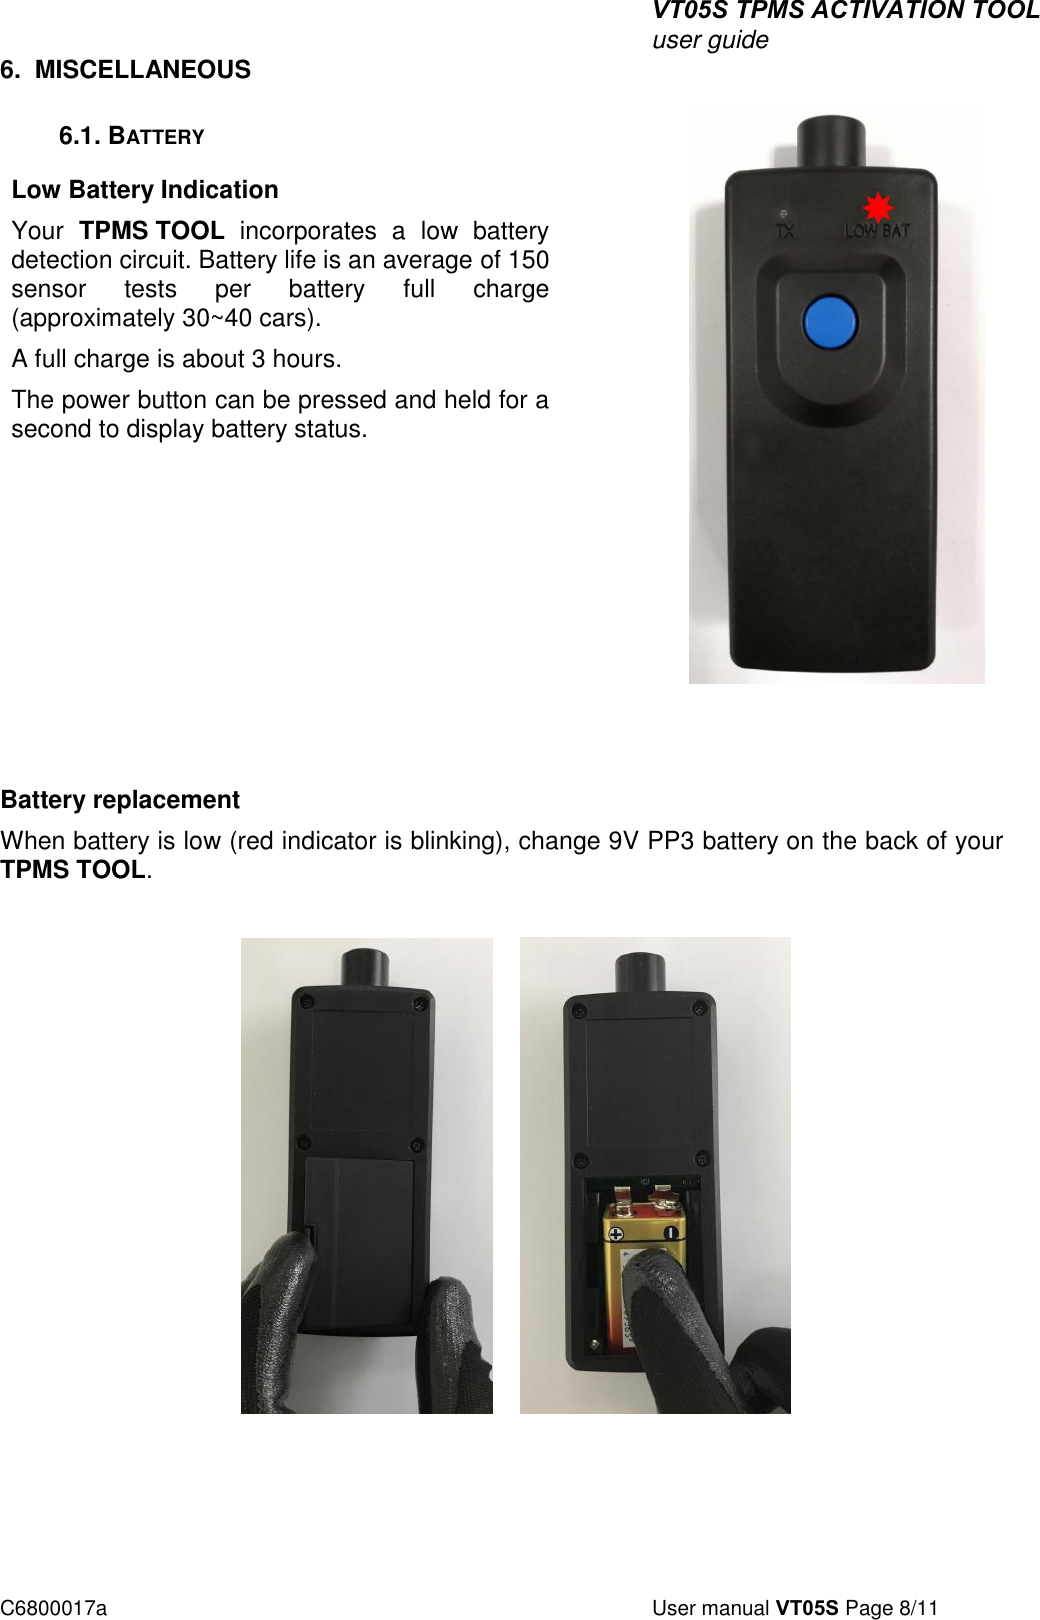 VT05S TPMS ACTIVATION TOOL user guide C6800017a  User manual VT05S Page 8/11 6. MISCELLANEOUS6.1. BATTERY Low Battery Indication Your  TPMS TOOL  incorporates  a  low  battery detection circuit. Battery life is an average of 150 sensor  tests  per  battery  full  charge (approximately 30~40 cars).  A full charge is about 3 hours. The power button can be pressed and held for a second to display battery status. Battery replacement  When battery is low (red indicator is blinking), change 9V PP3 battery on the back of your TPMS TOOL. 